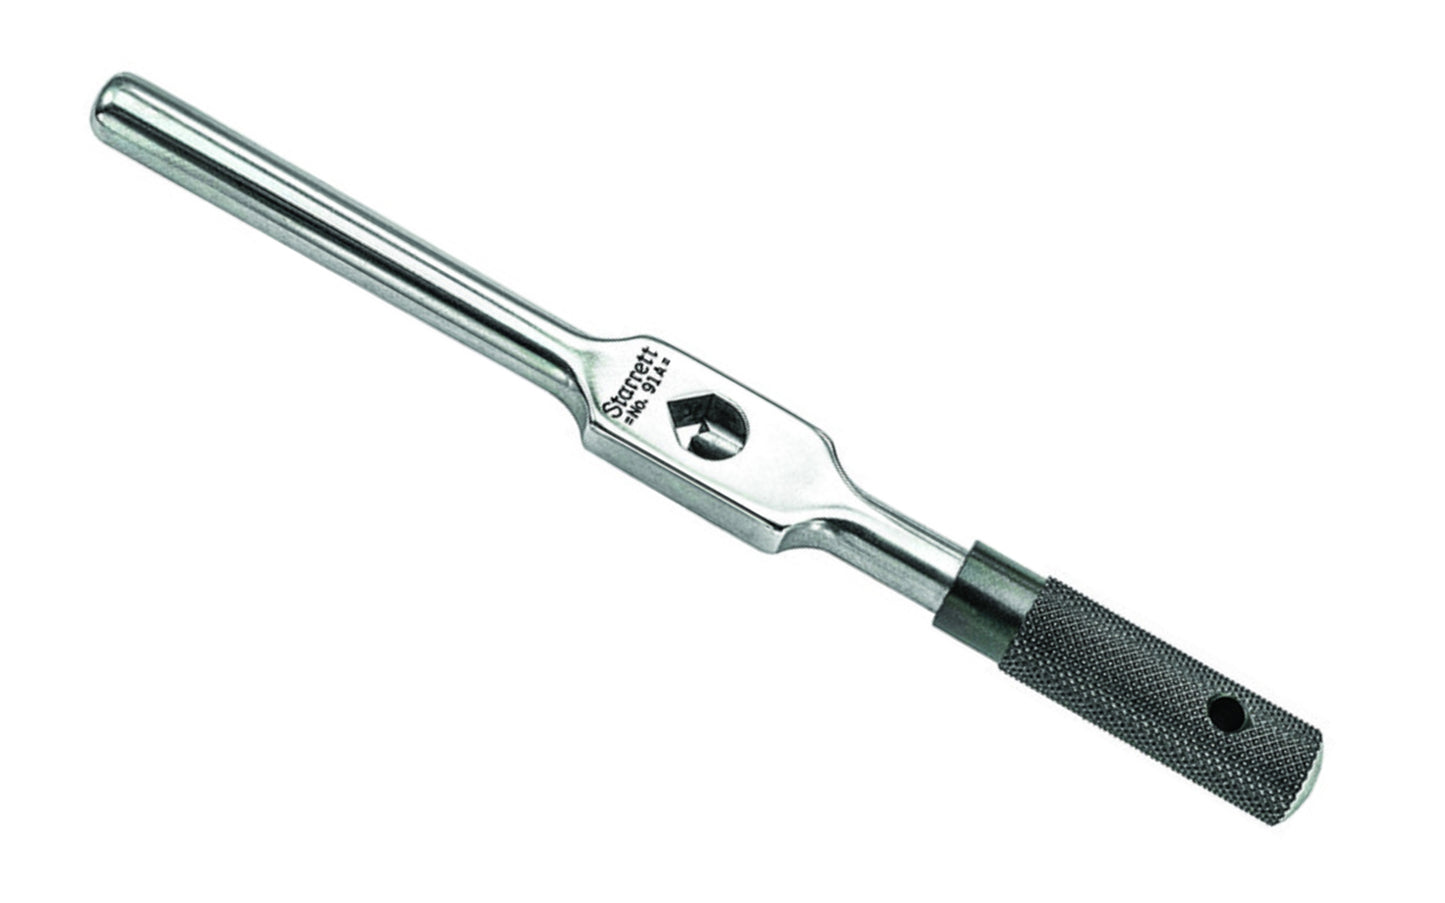 Starrett 91 Tap Wrench is strong & well proportioned. It is nicely finished and the gripping surface is properly tempered. Starrett Tap Wrench - 1/16" to 1/4" Capacity Size. Starrett Model 91A.